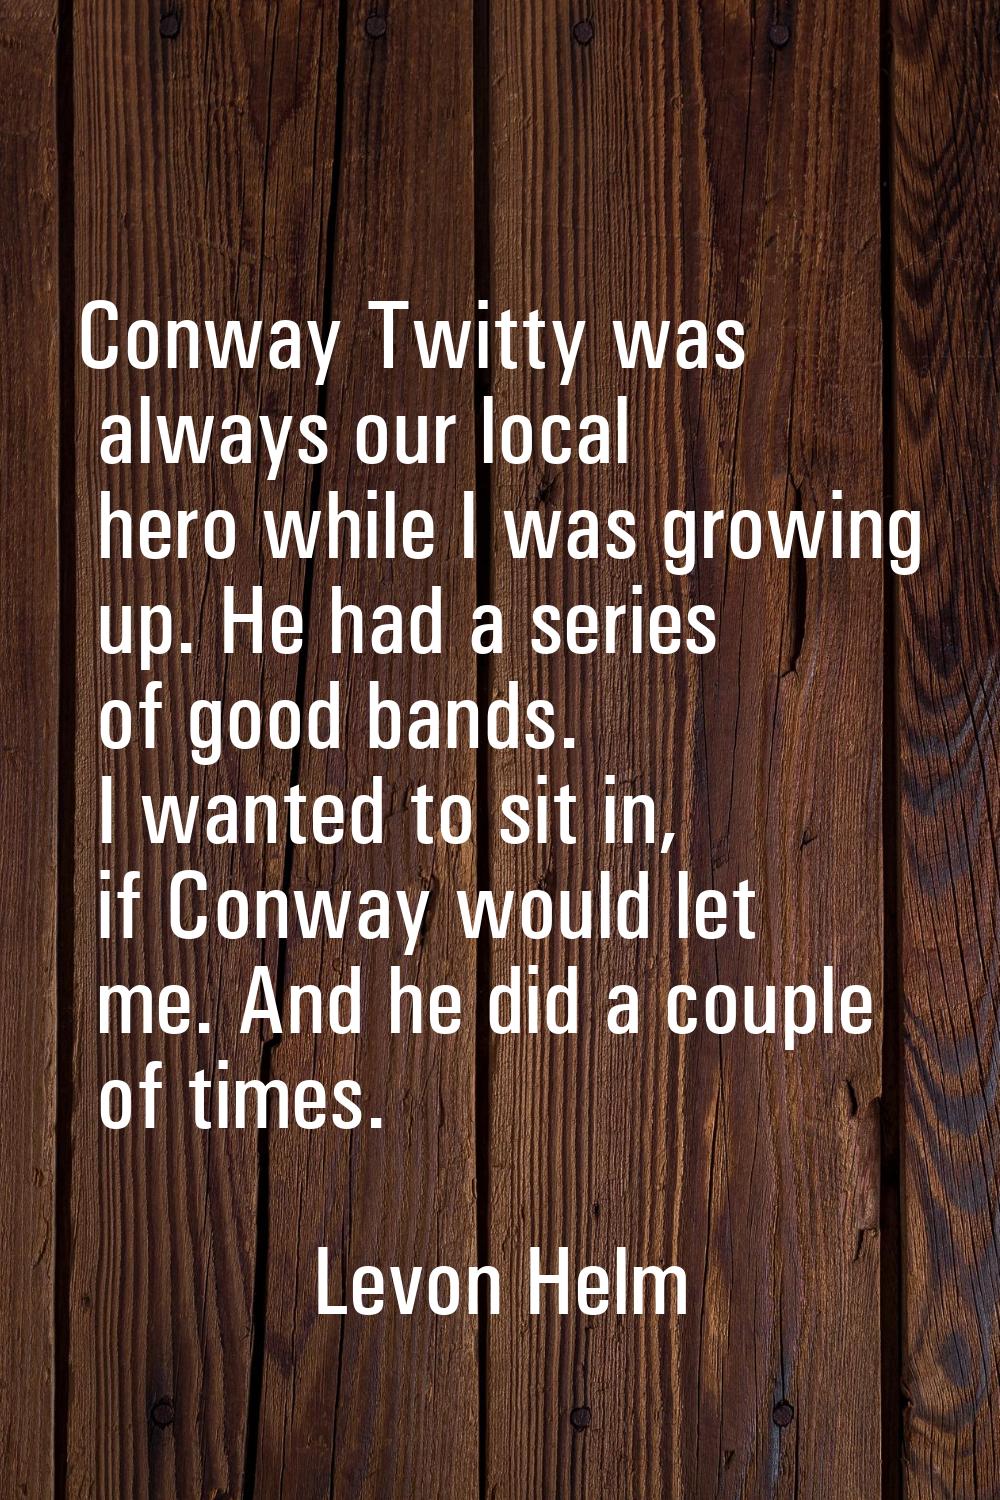 Conway Twitty was always our local hero while I was growing up. He had a series of good bands. I wa